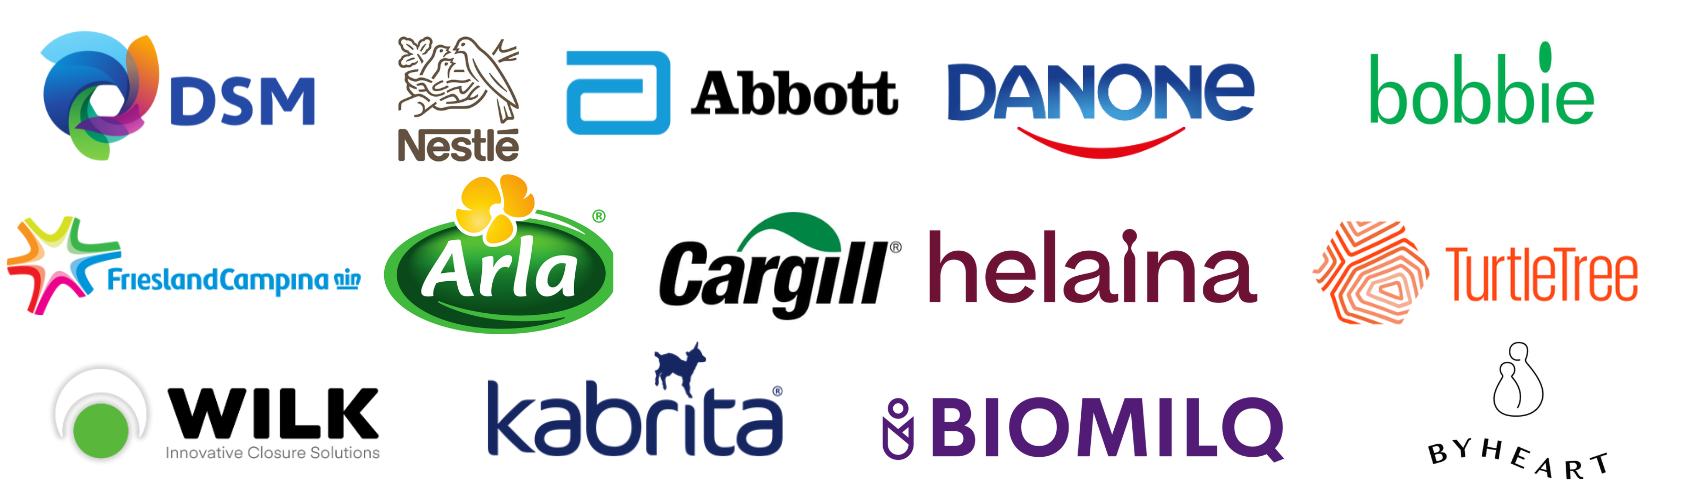 Copy of Companies Attending banner (4)